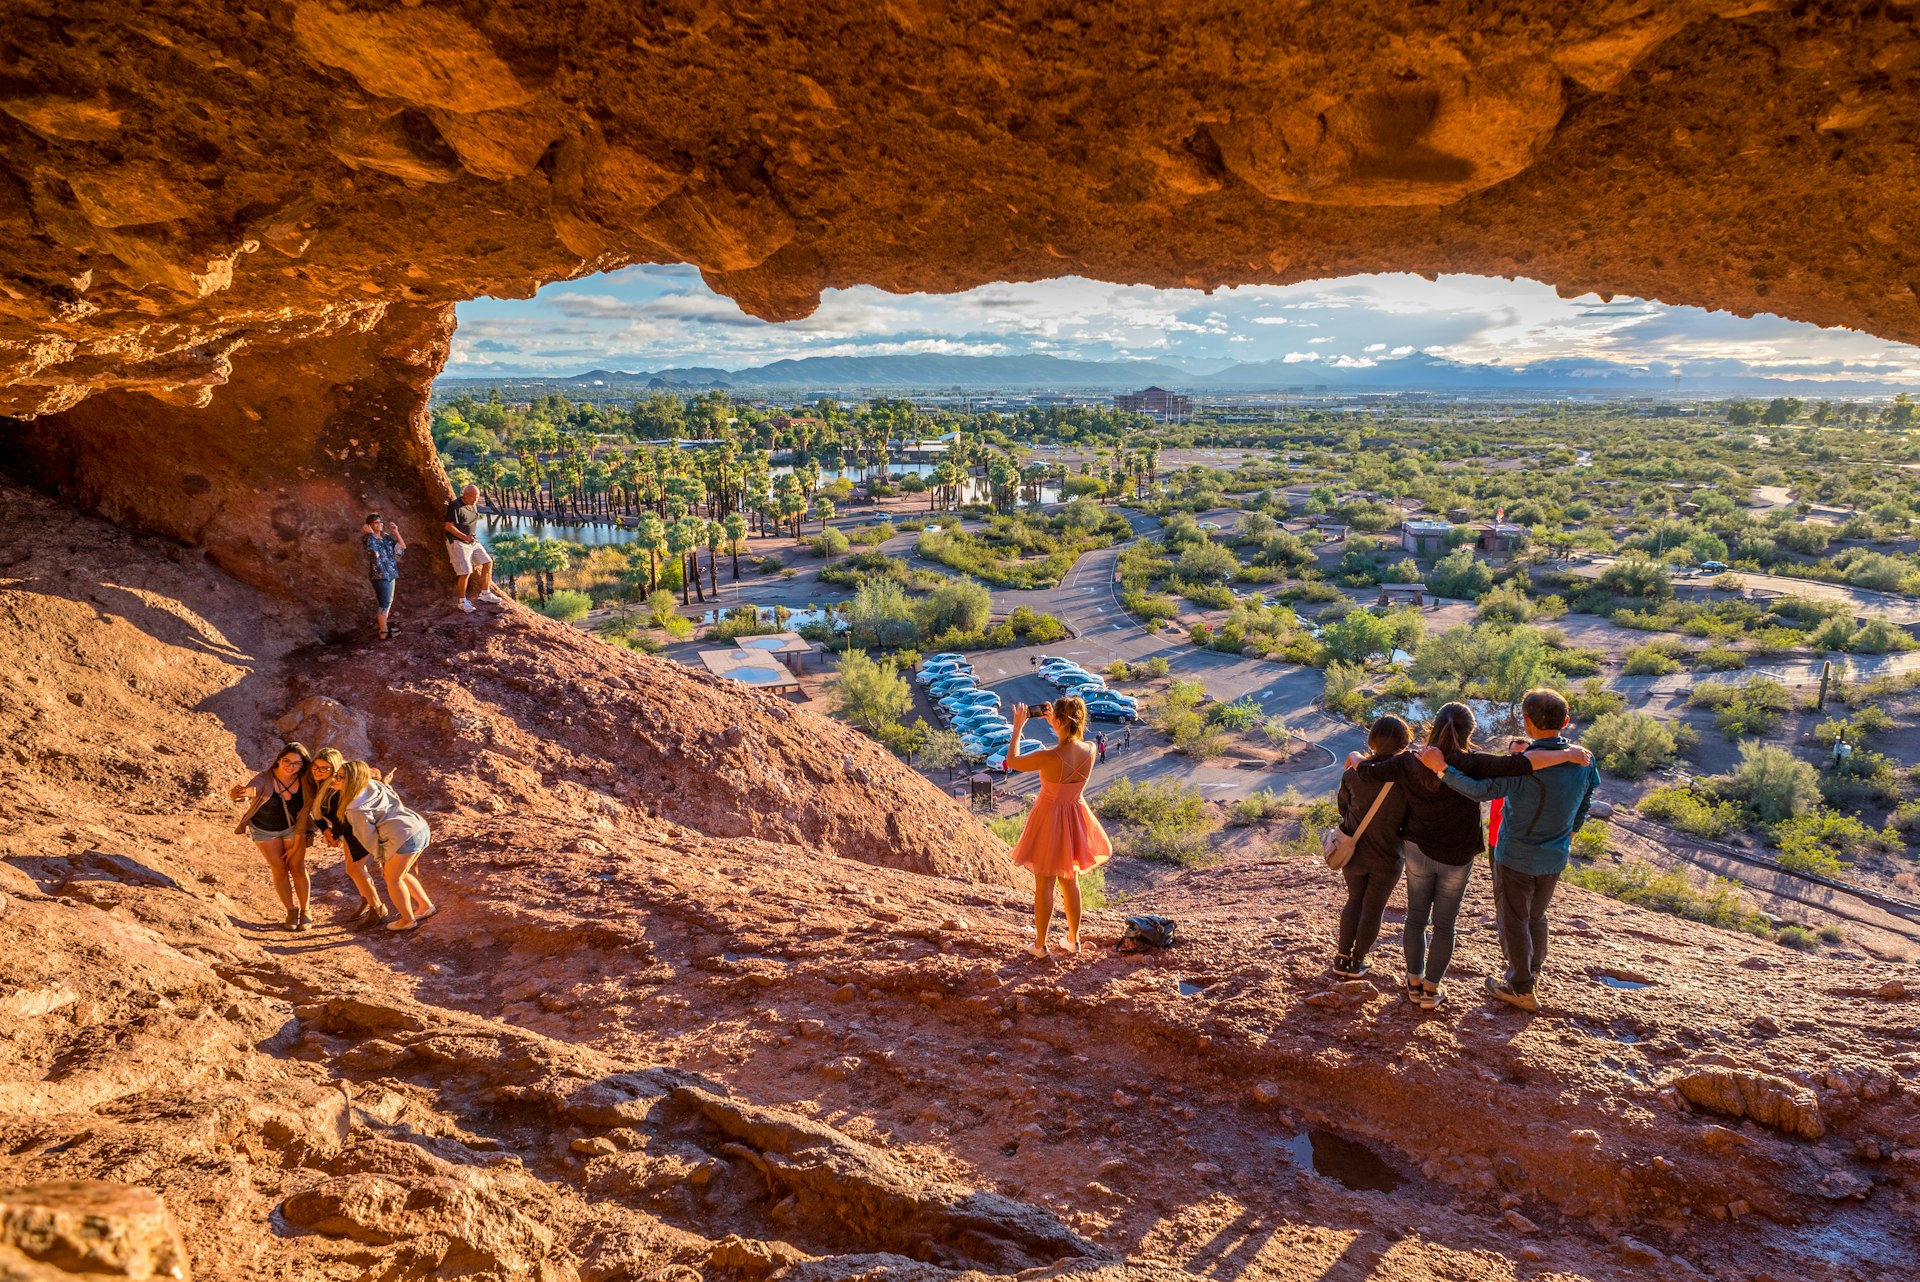 People snap selfies in the mouth of Hole-in-the-Rock, Phoenix, Arizona